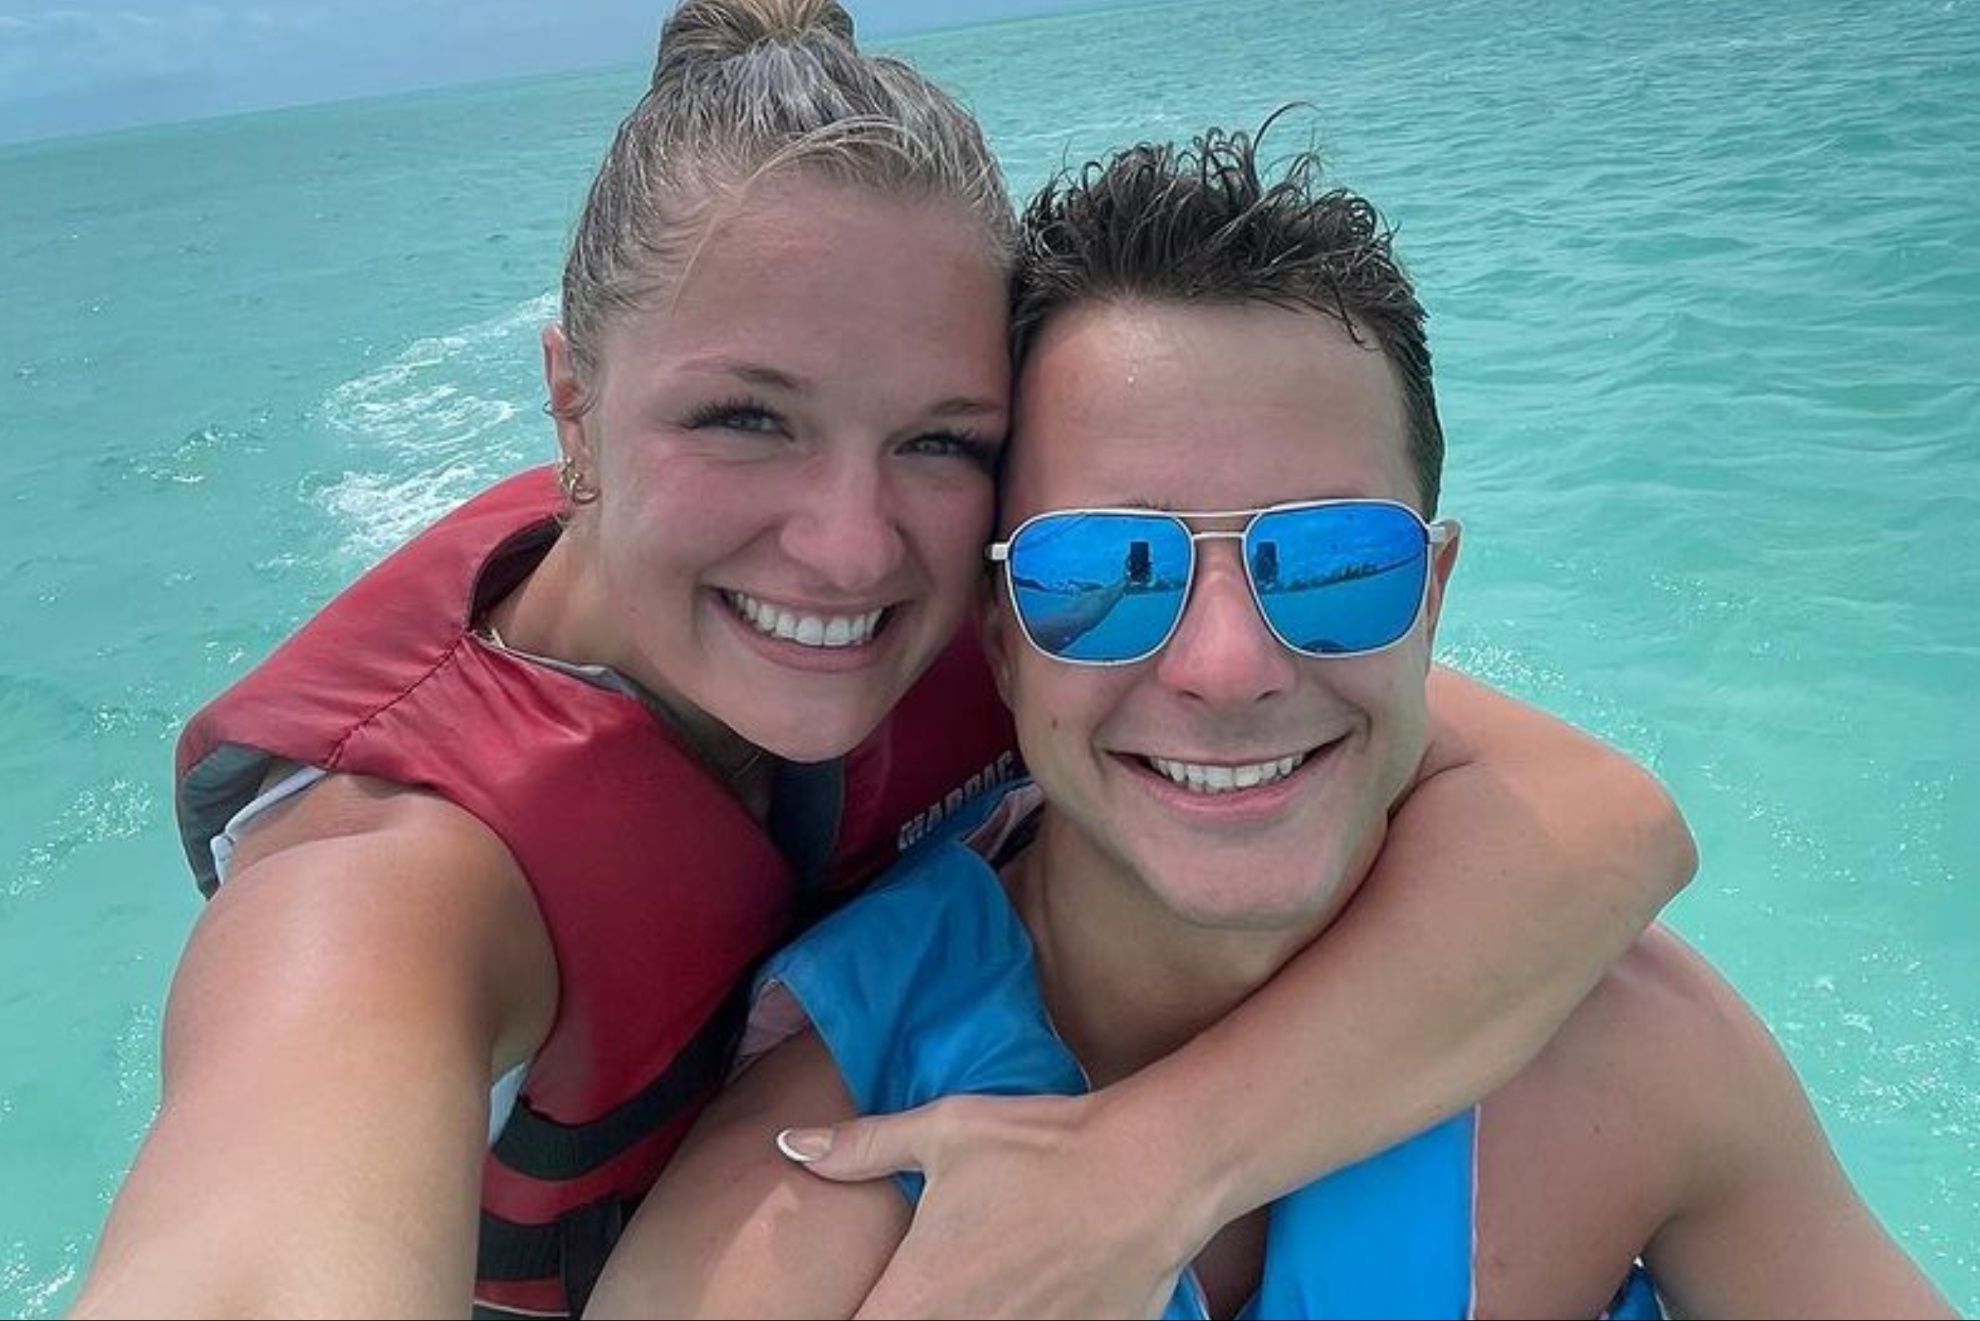 Jenna and Brock Purdy in Turks and Caicos Islands.